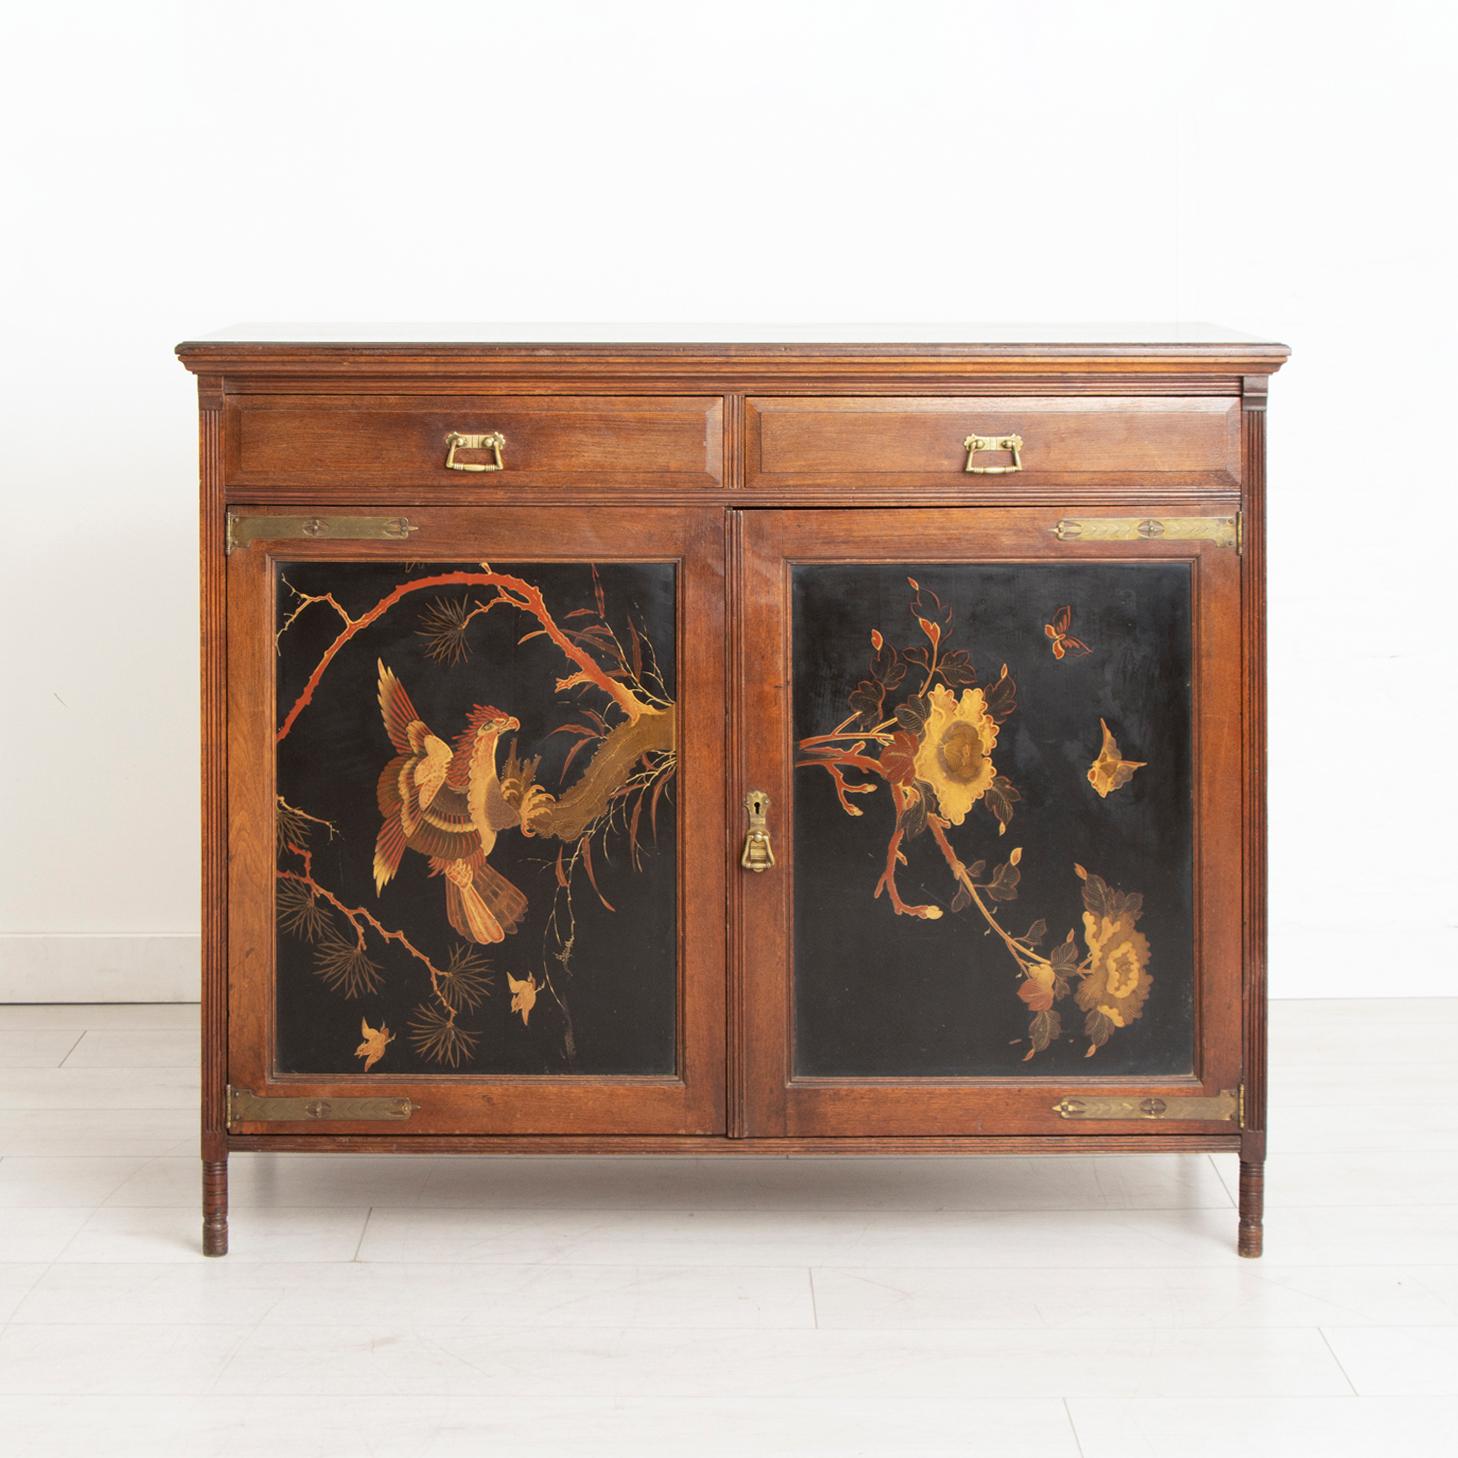 A late 19th-century Aesthetic movement mahogany sideboard with Chinoiserie polychrome lacquered decoration of a bird of prey and blossom tree. The sideboard has a double-doored cupboard with shelving behind and two drawers above.

Dimensions: W